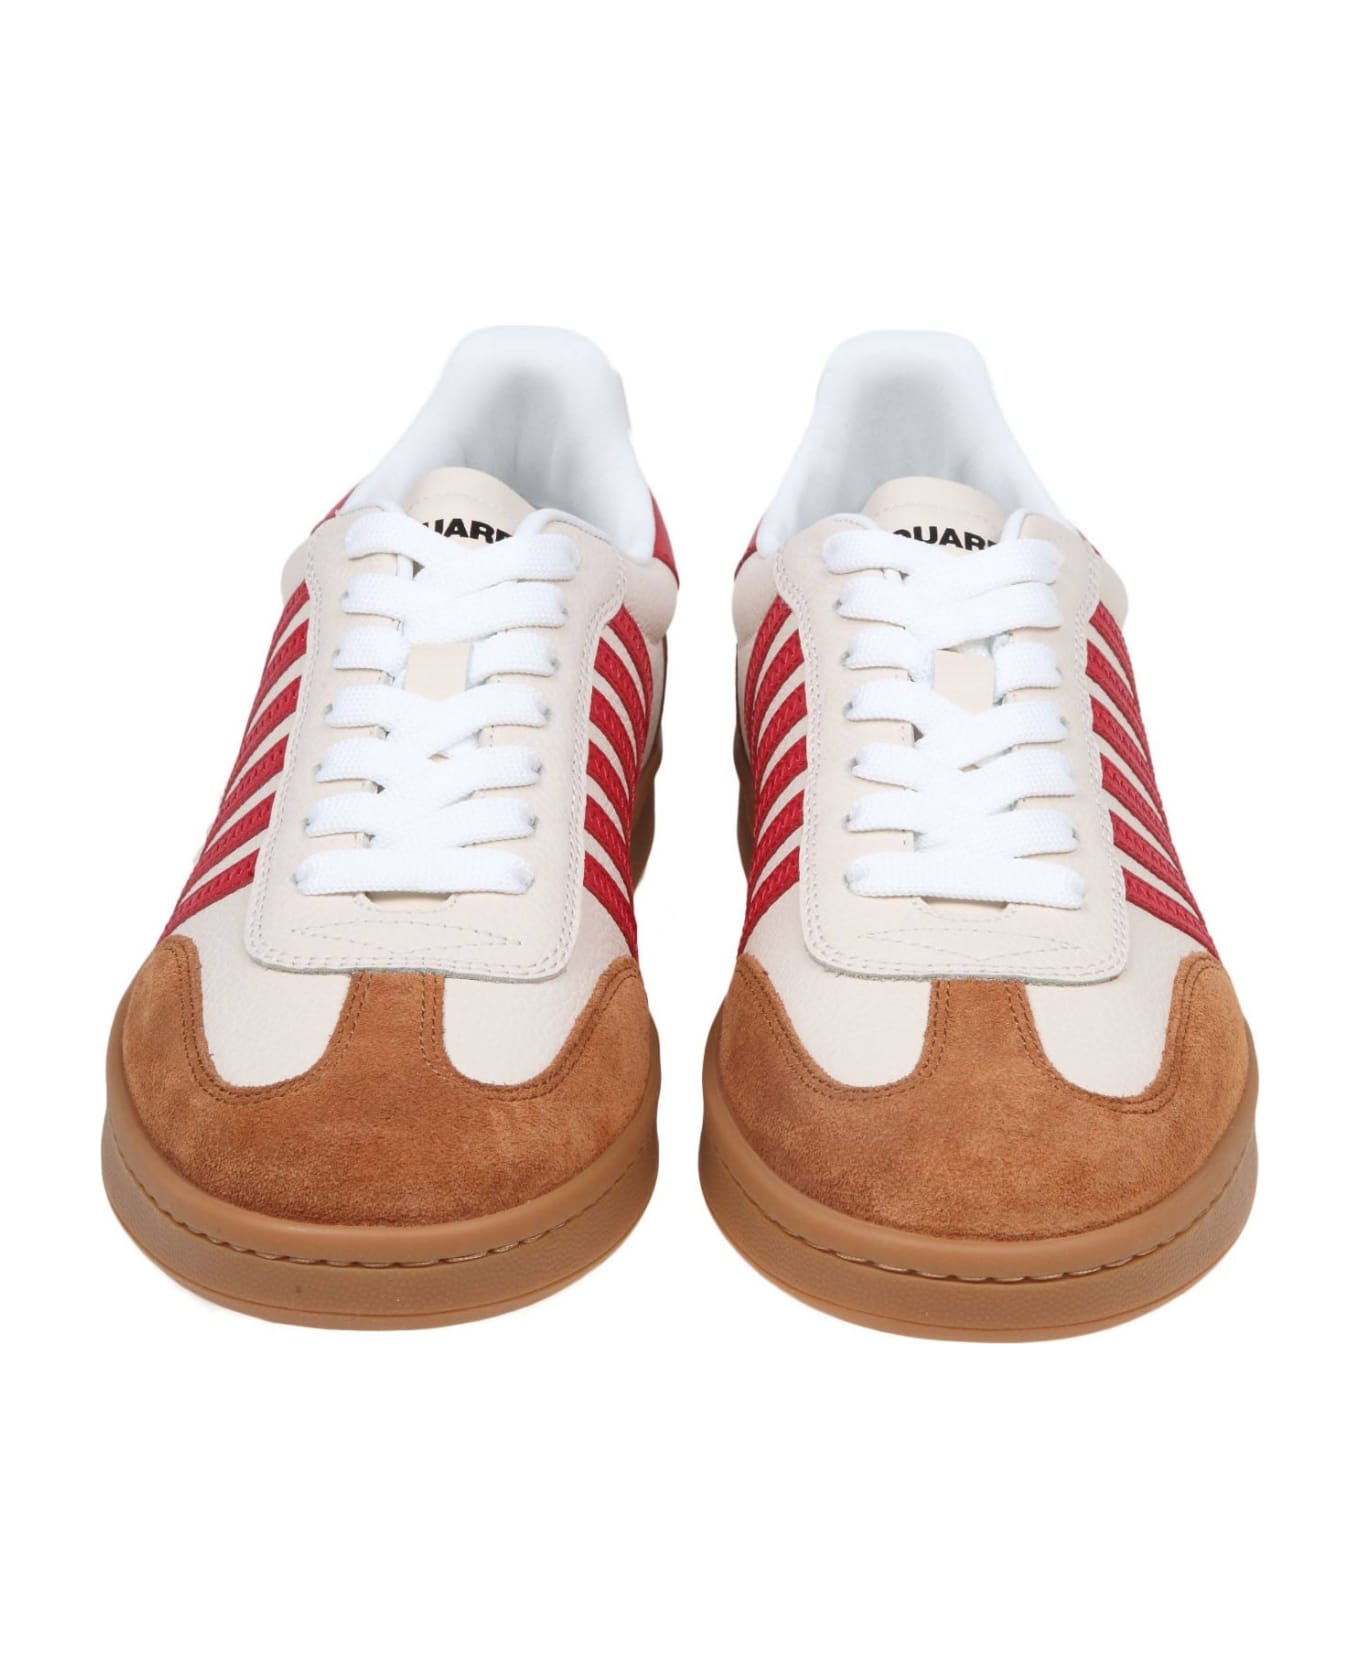 Dsquared2 Boxer Sneakers In White/red Leather And Suede - White/Red スニーカー